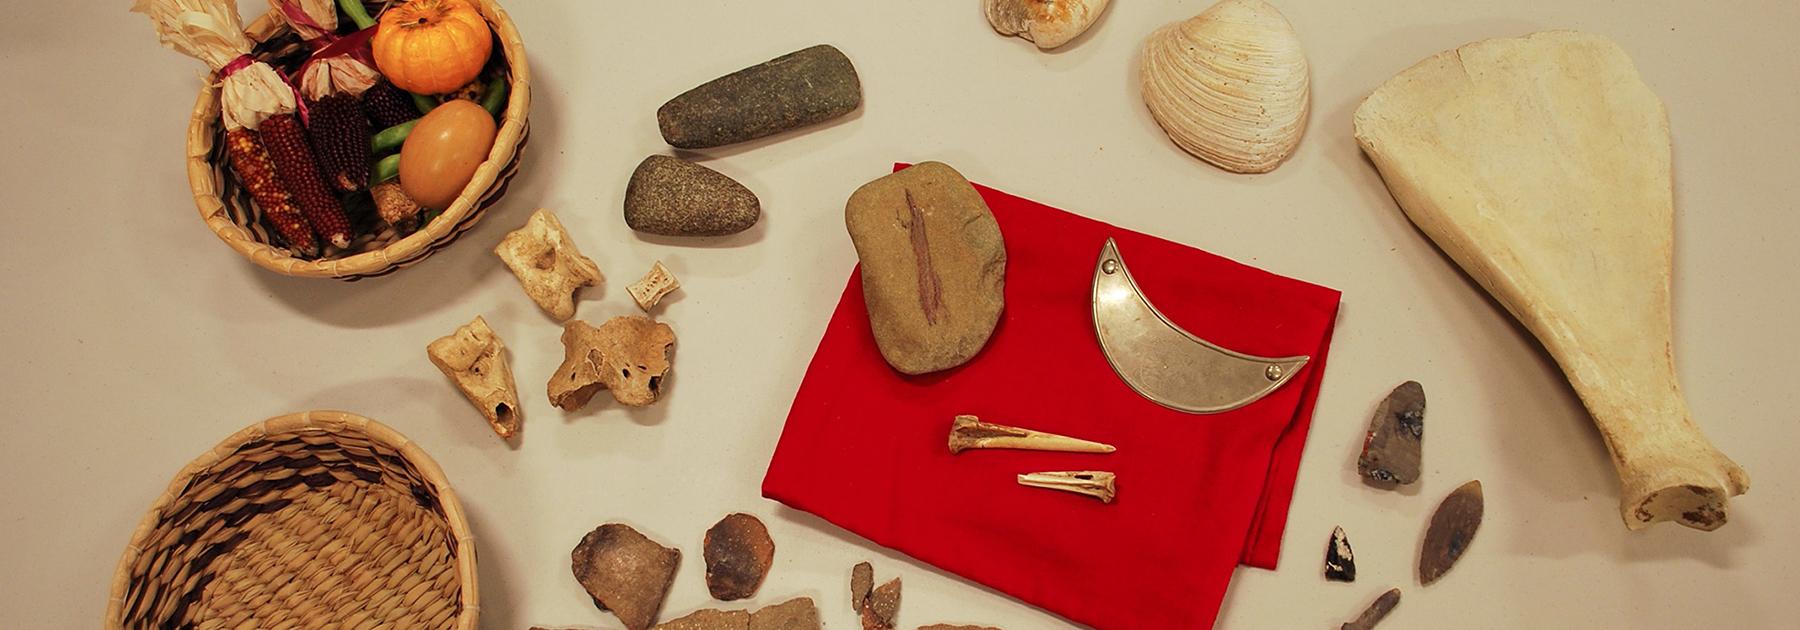 photo of educational items on a table top